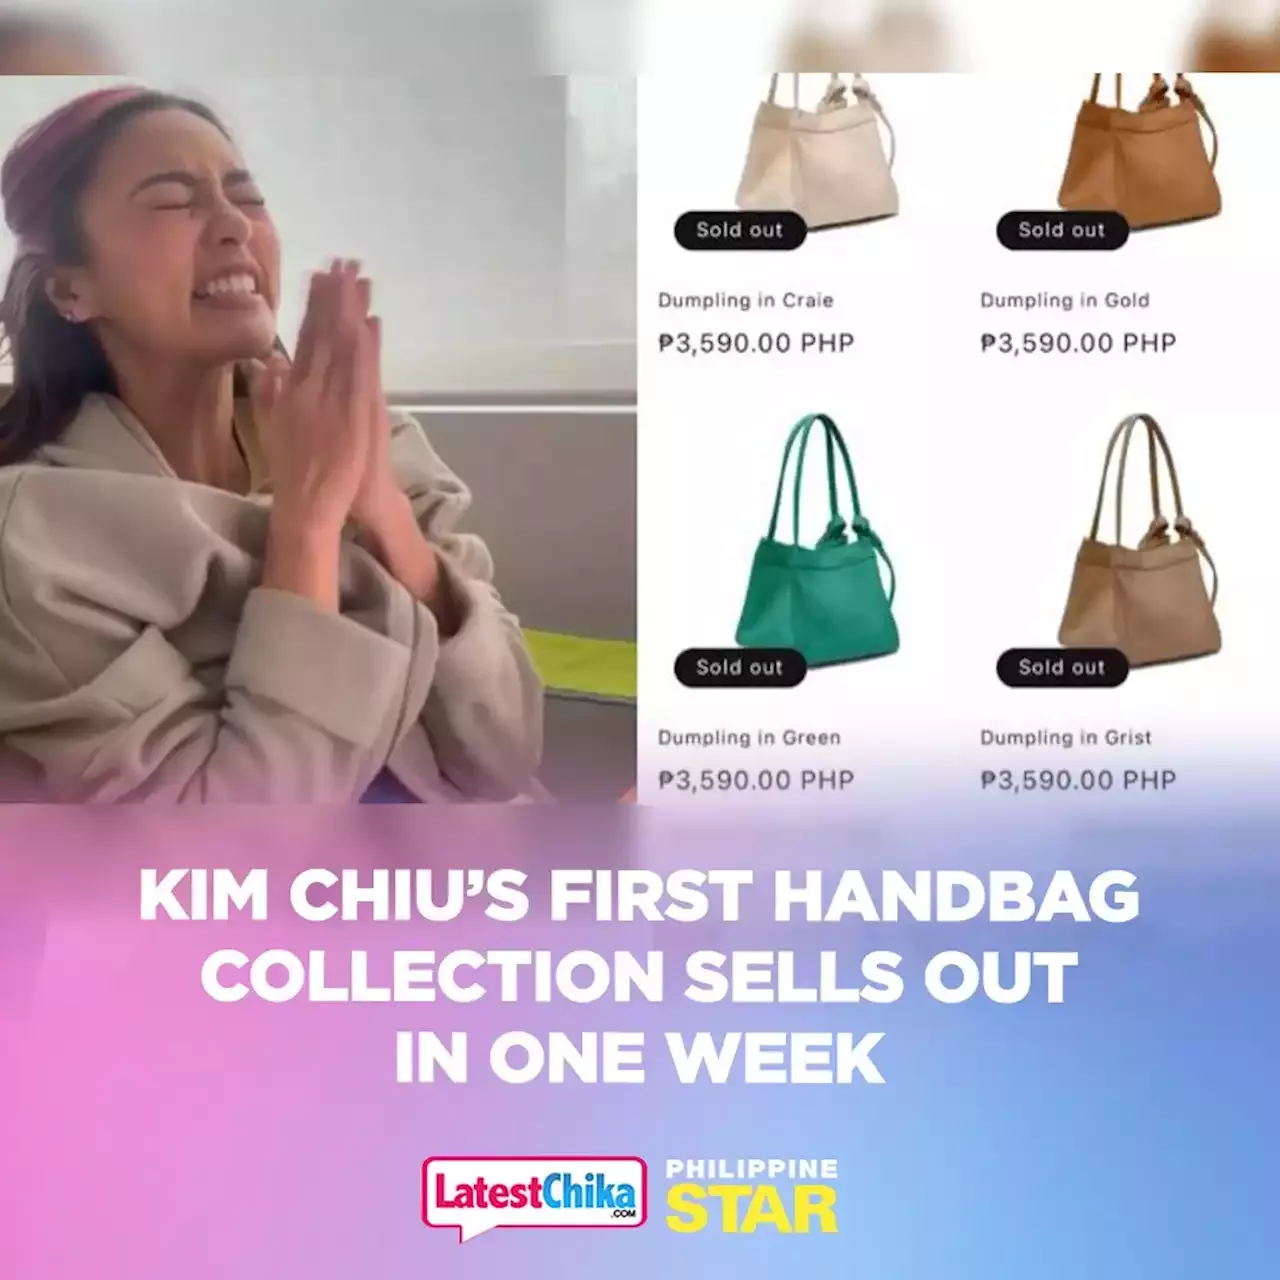 WATCH: Kim Chiu ecstatic over sold-out handbags a week after her business  launch